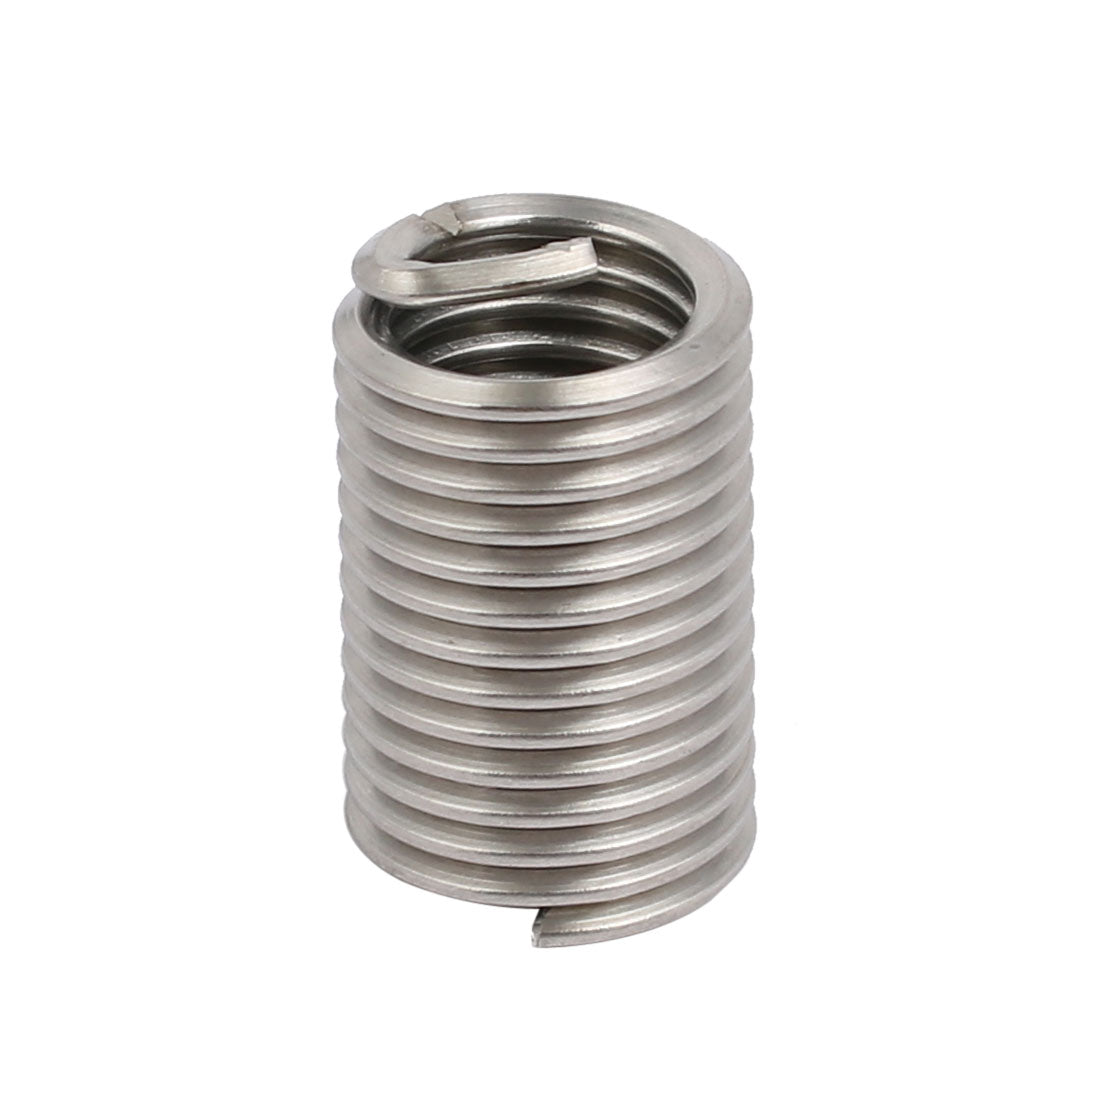 uxcell Uxcell 3/8-16x0.938" 304 Stainless Steel Helical Coil Wire Thread Insert 25pcs